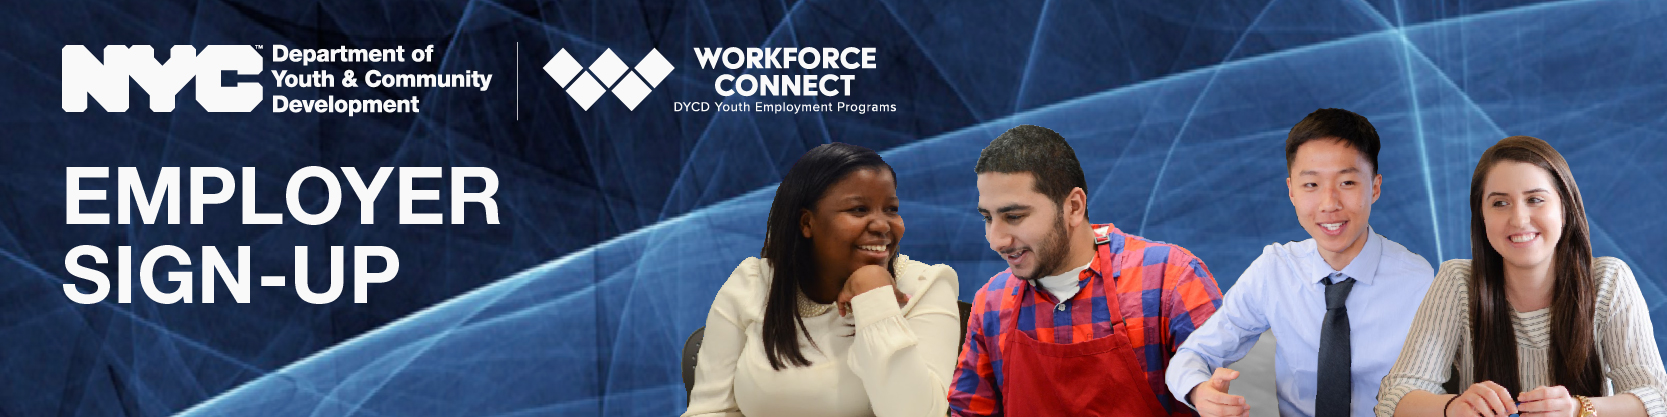 Employer sign up logo featuring participants posing for photos